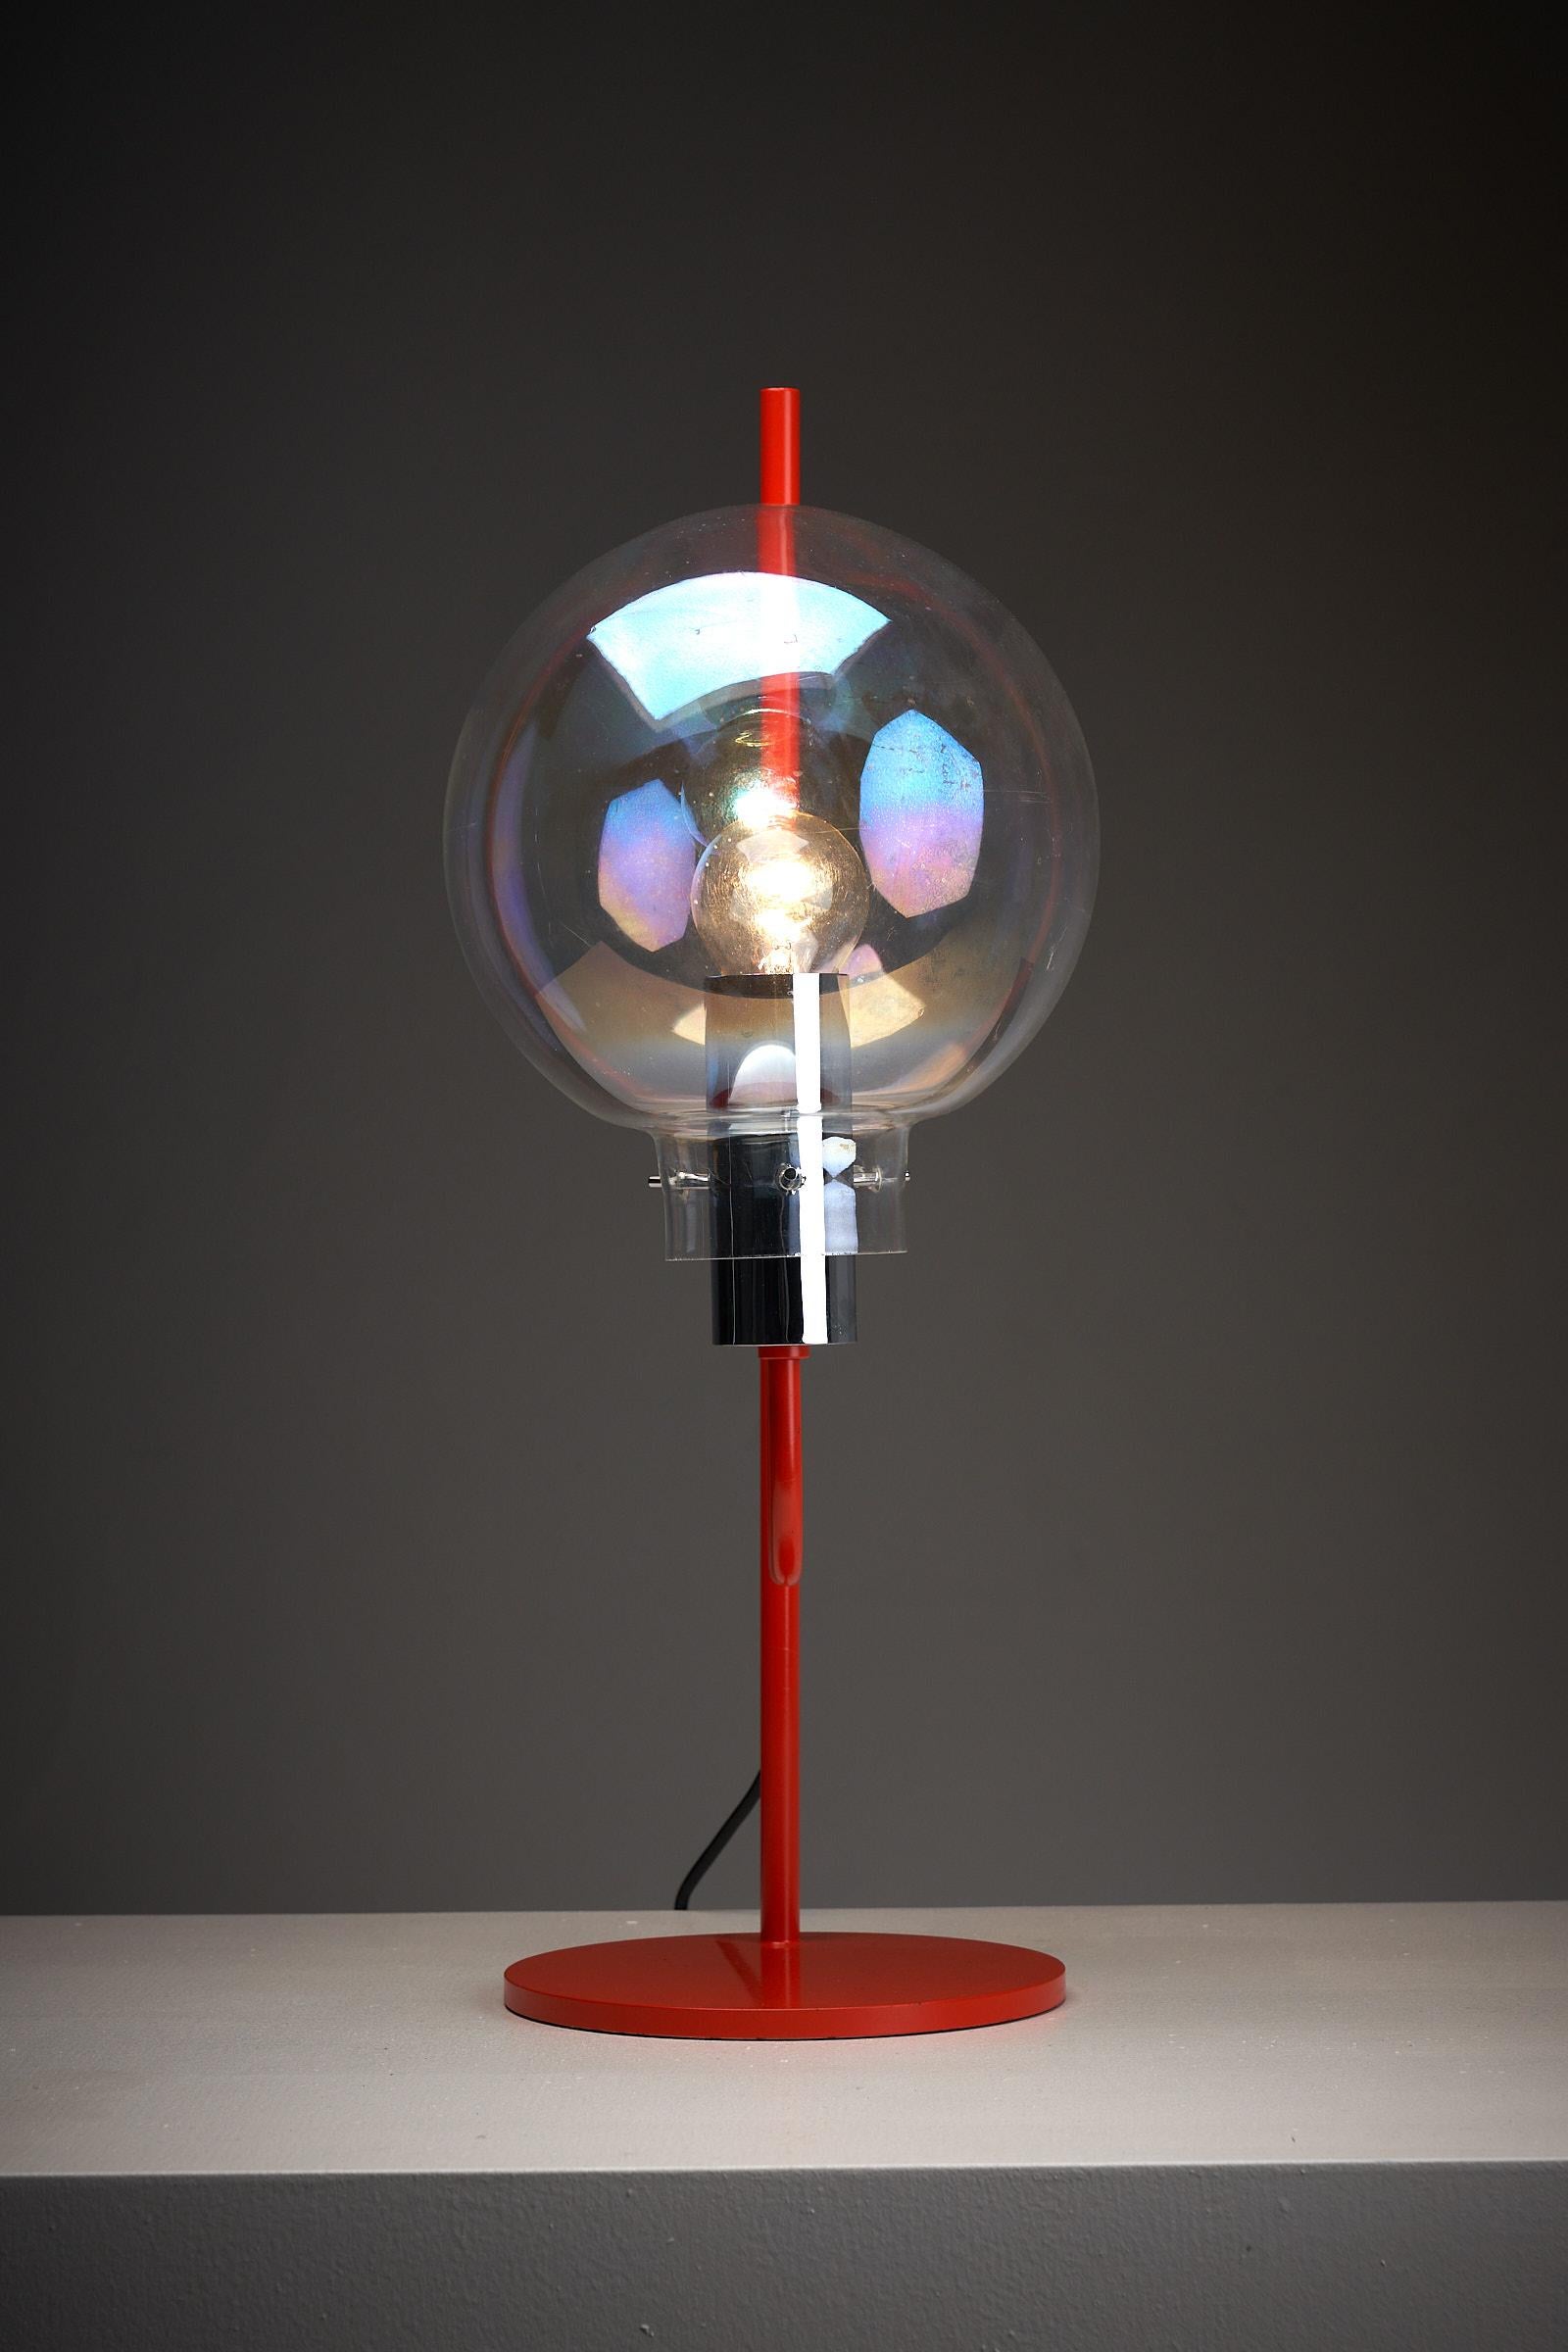 Captivating BAG Turgi table lamp! 🧡 Featuring a vibrant orange painted frame and a mesmerizing clear iridescent glass sphere, this lamp is a true work of art. Model 192 508 by BAG Turgi, documentation on request.